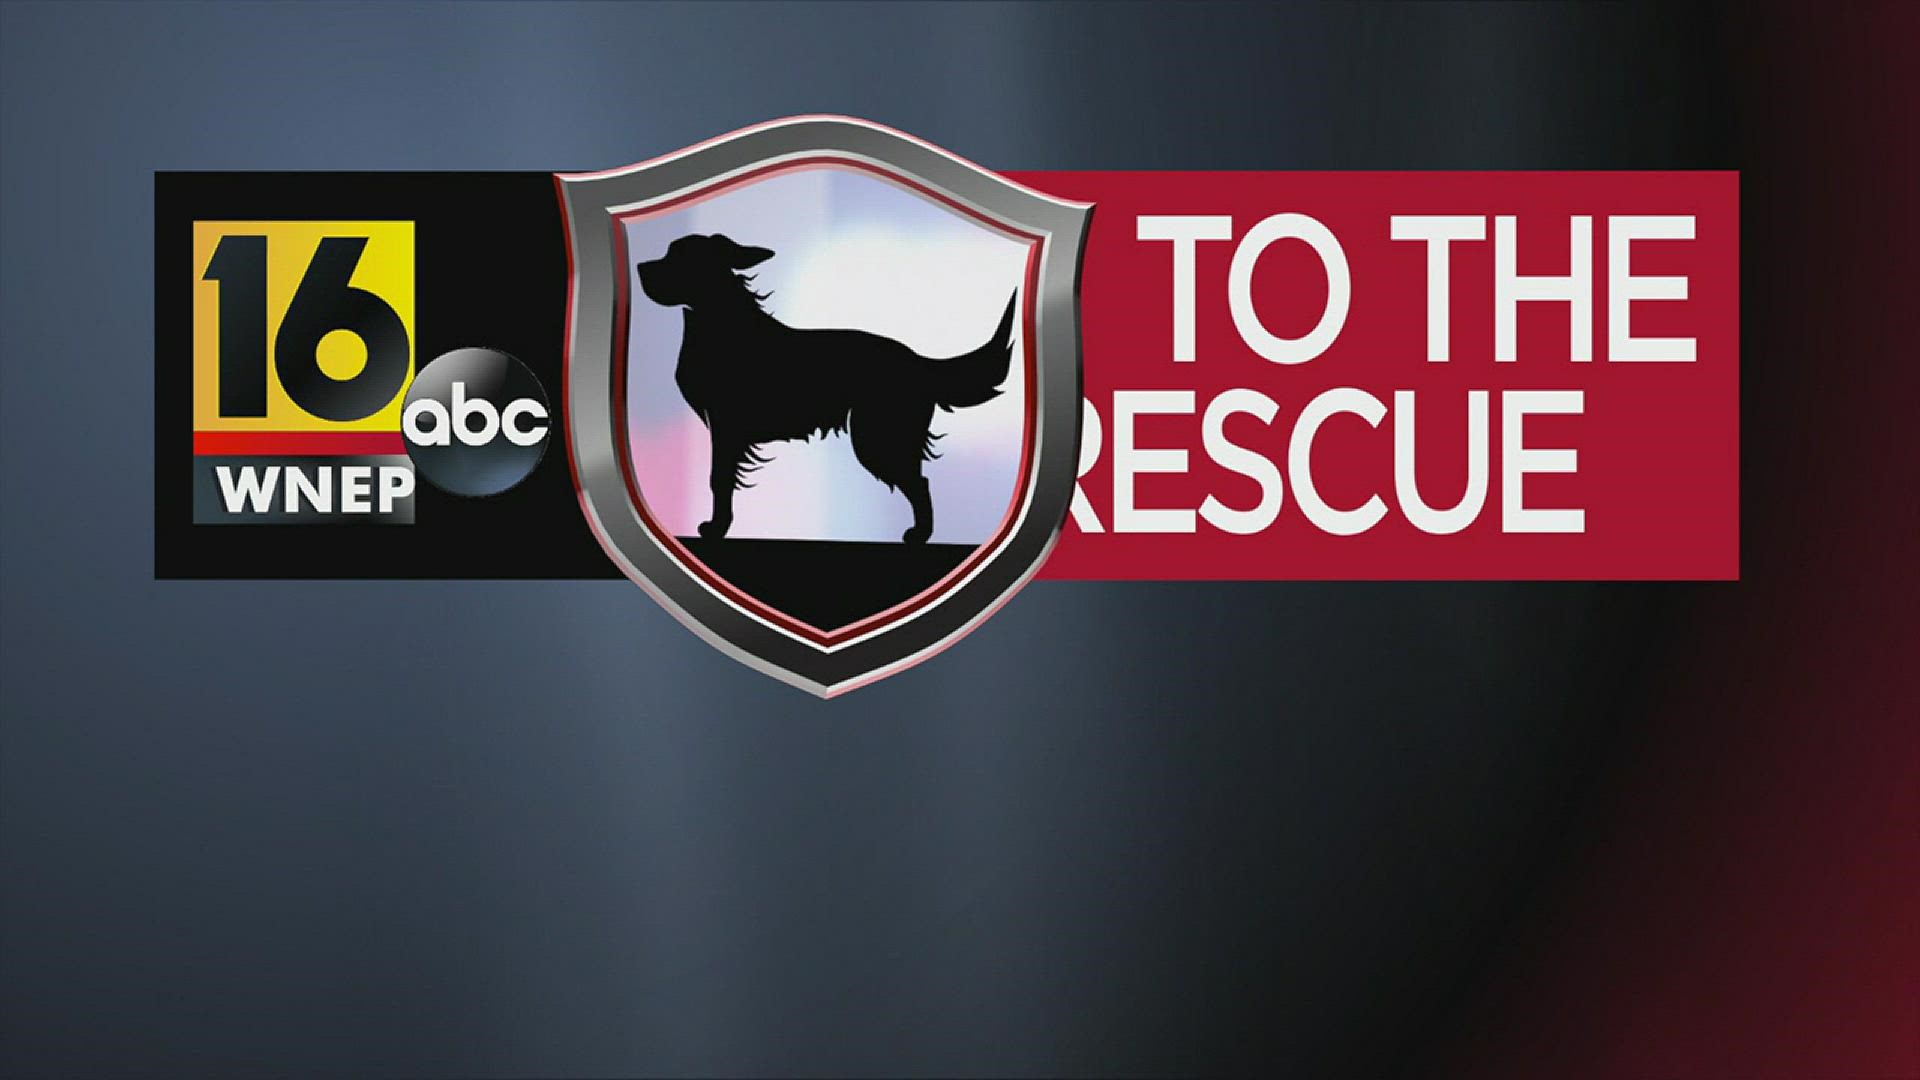 In this week's 16 To The Rescue, we meet a 1-year-old boxer who has spent most of his short life neglected and tied up outside, until about two weeks ago.